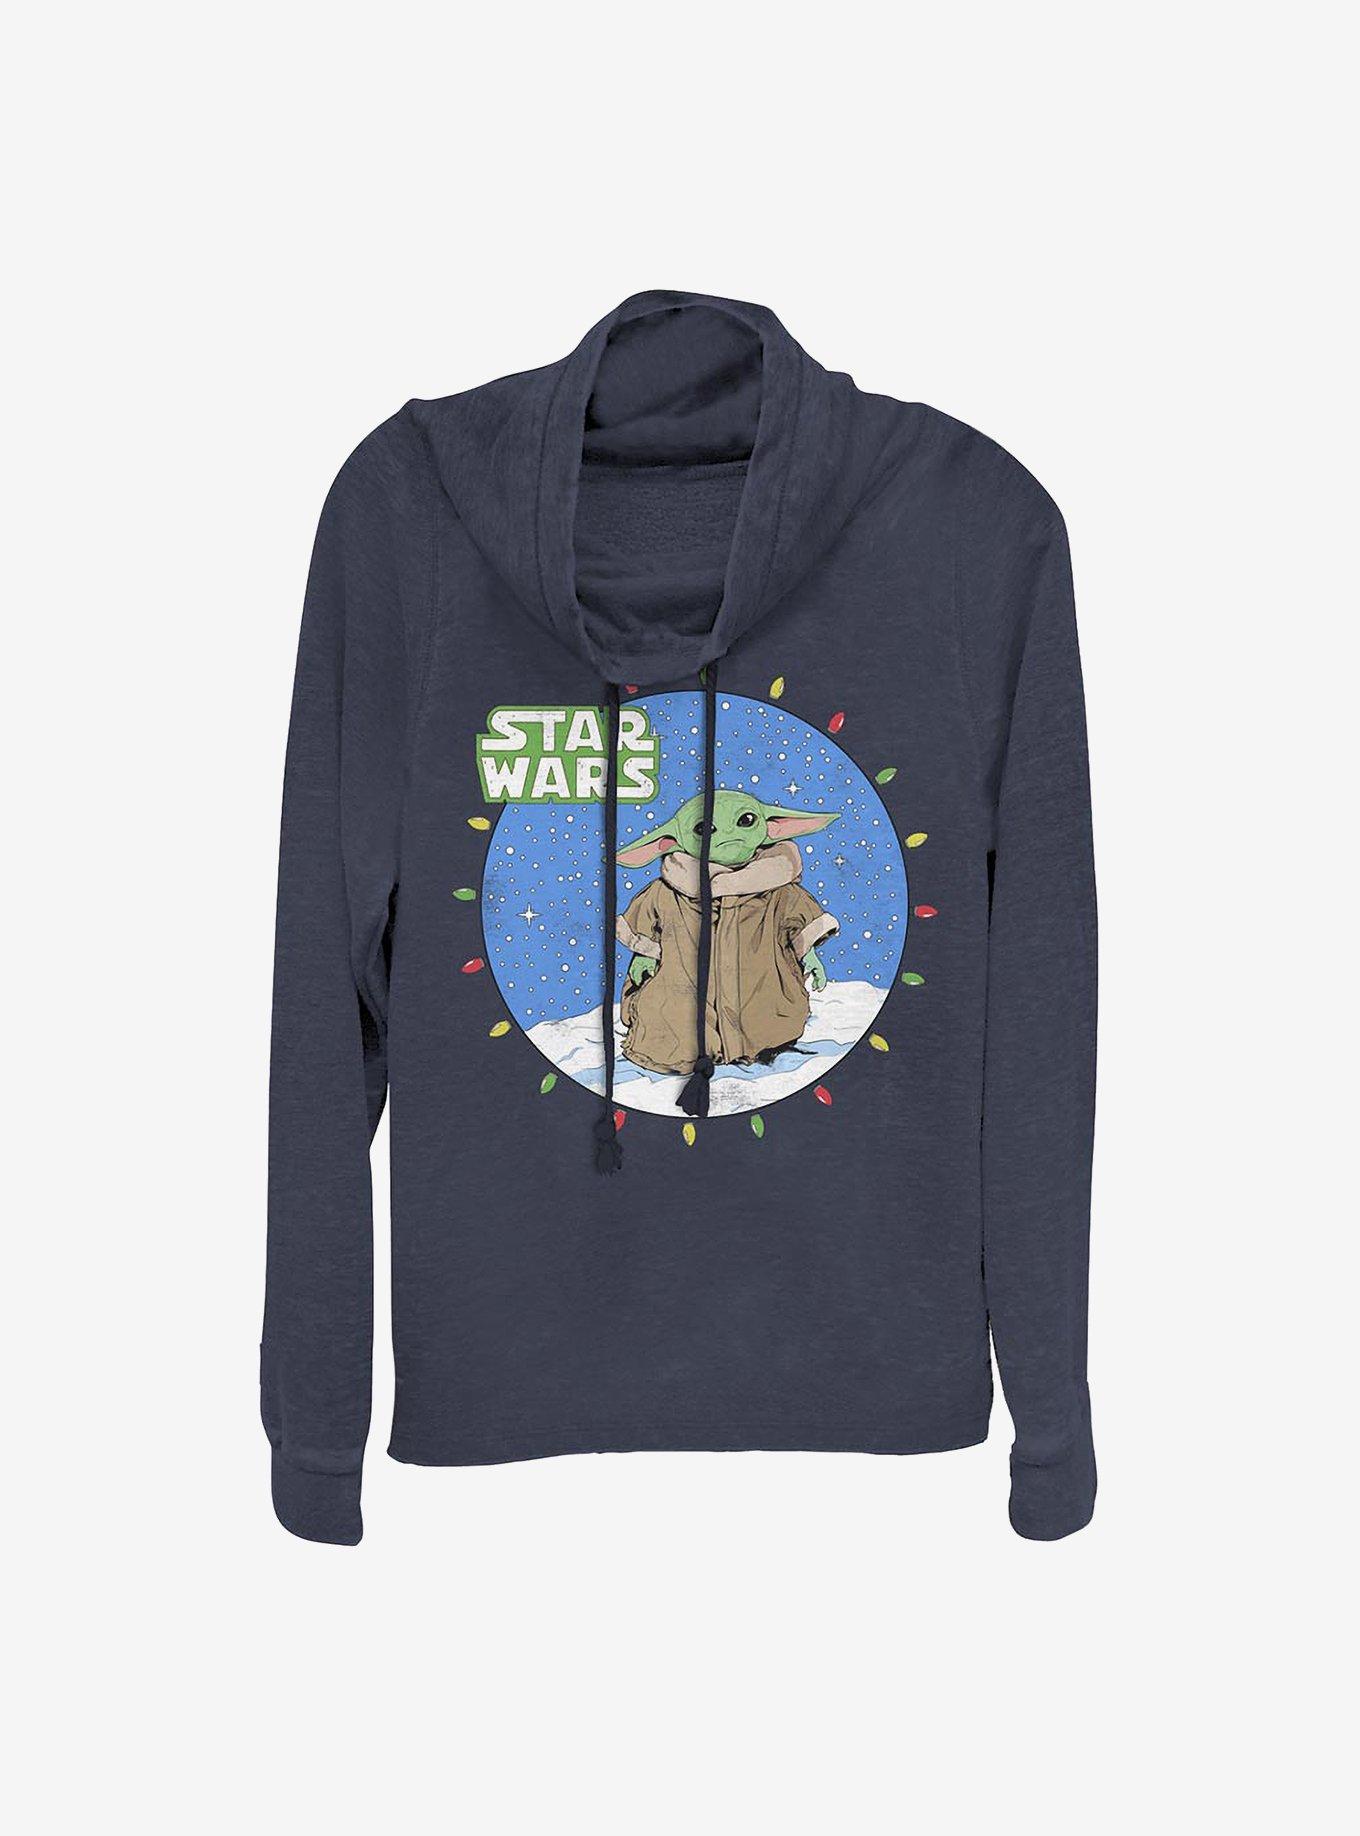 Star Wars The Mandalorian The Child Snow Baby Lights Cowlneck Long-Sleeve Girls Top, NAVY, hi-res